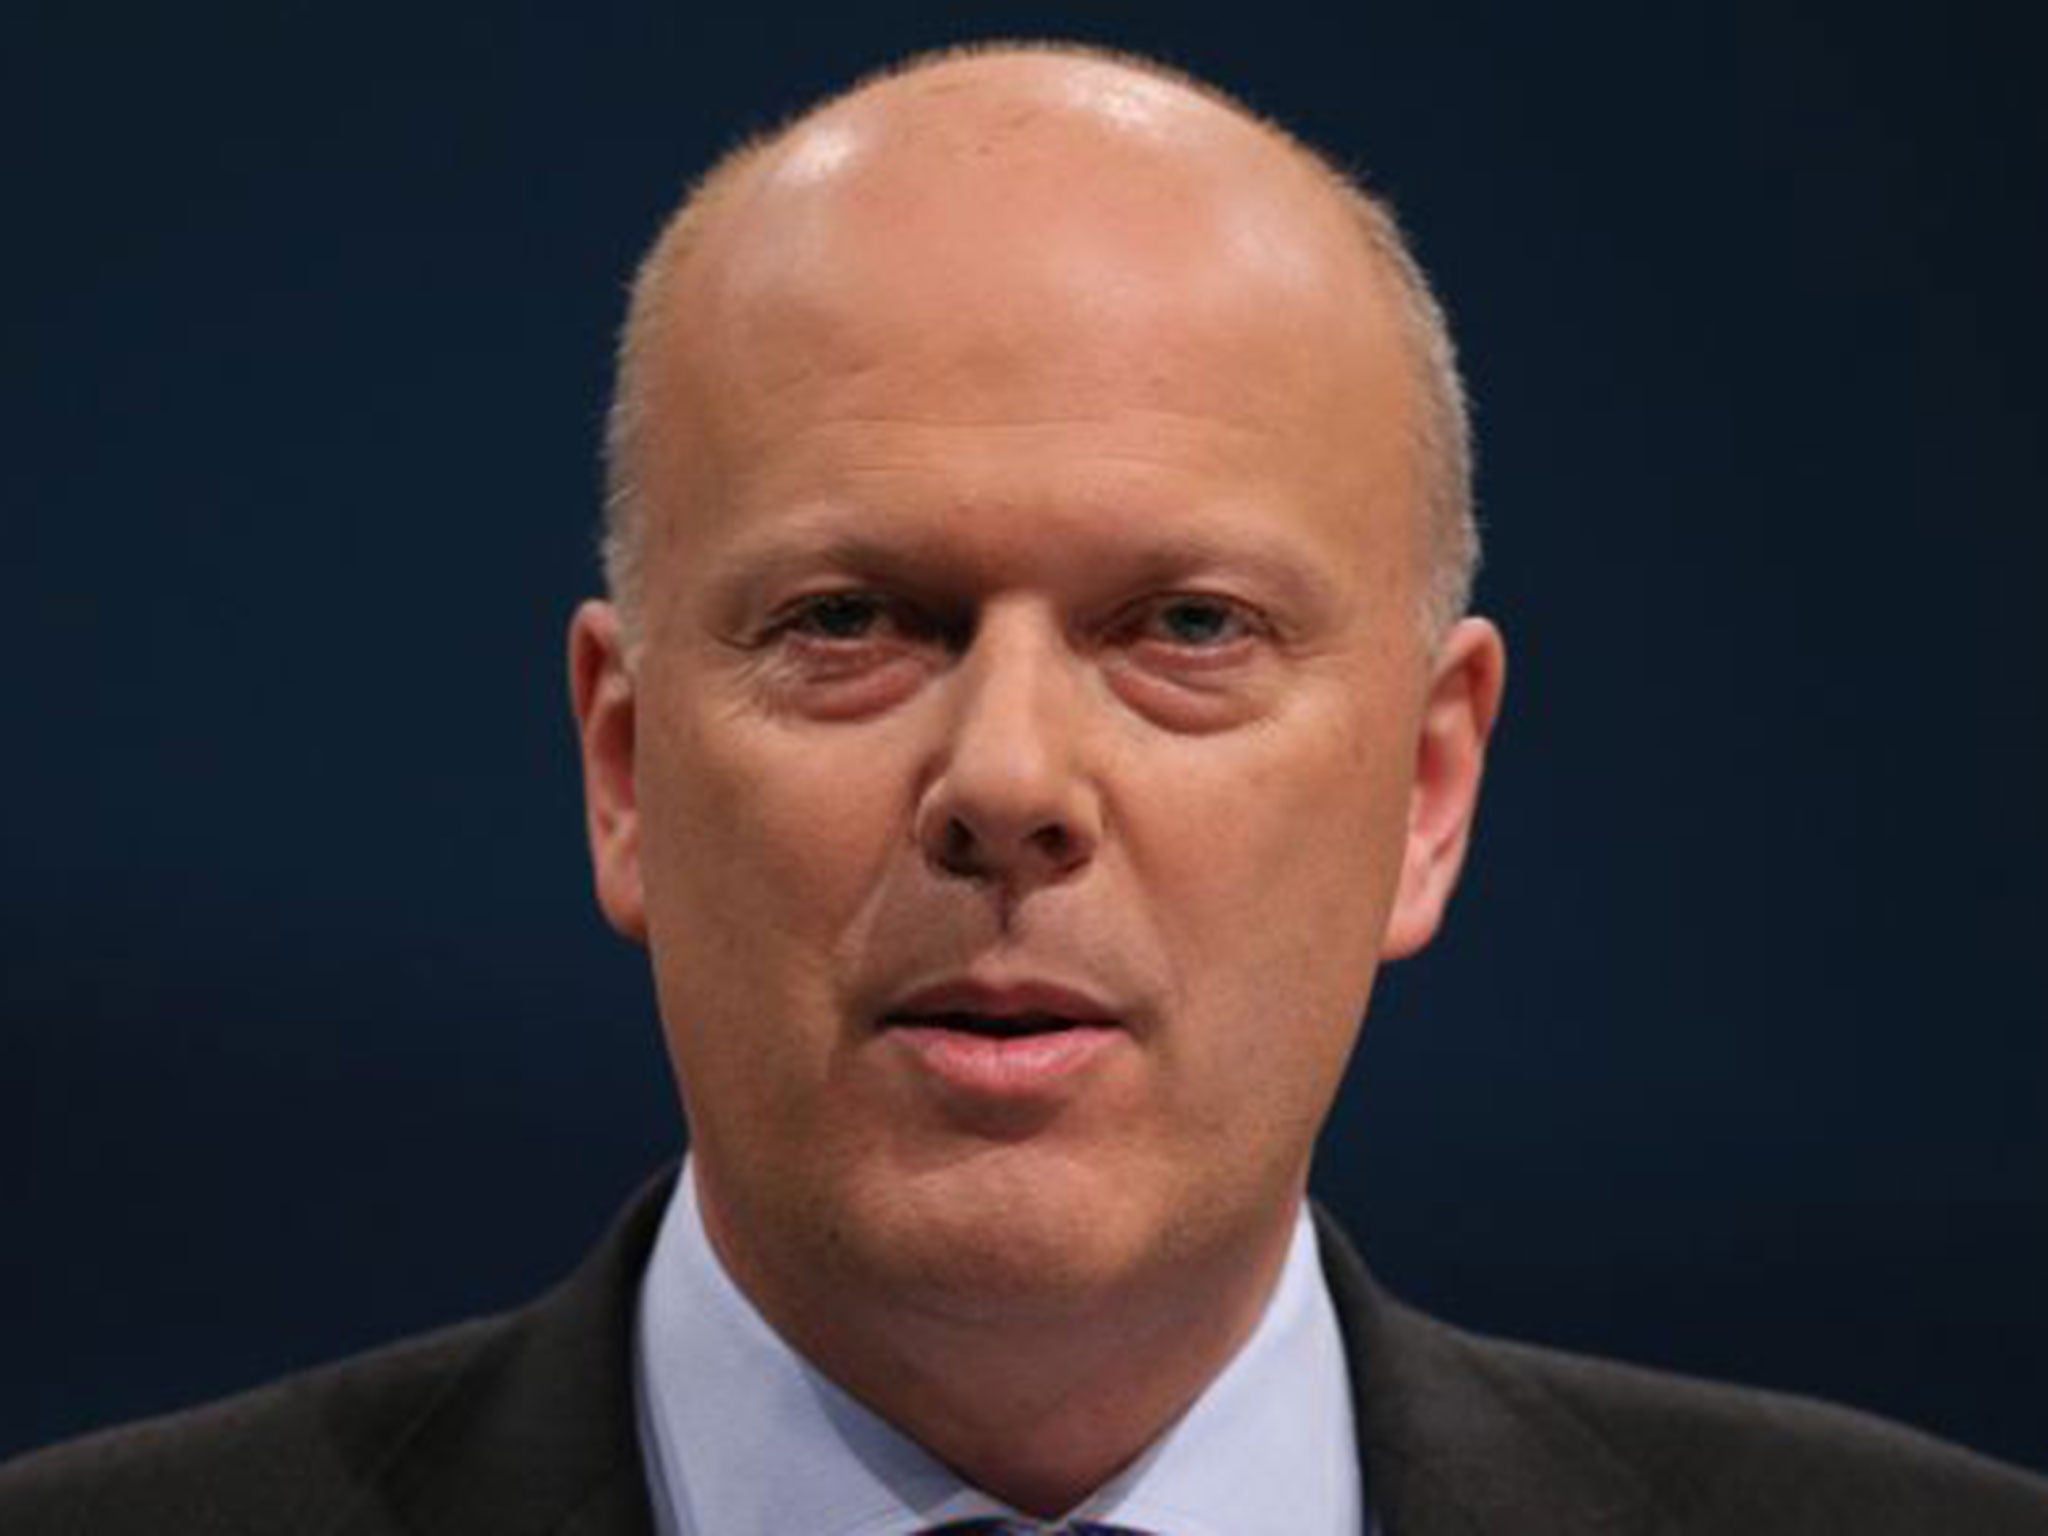 Chris Grayling, Secretary of State for Justice